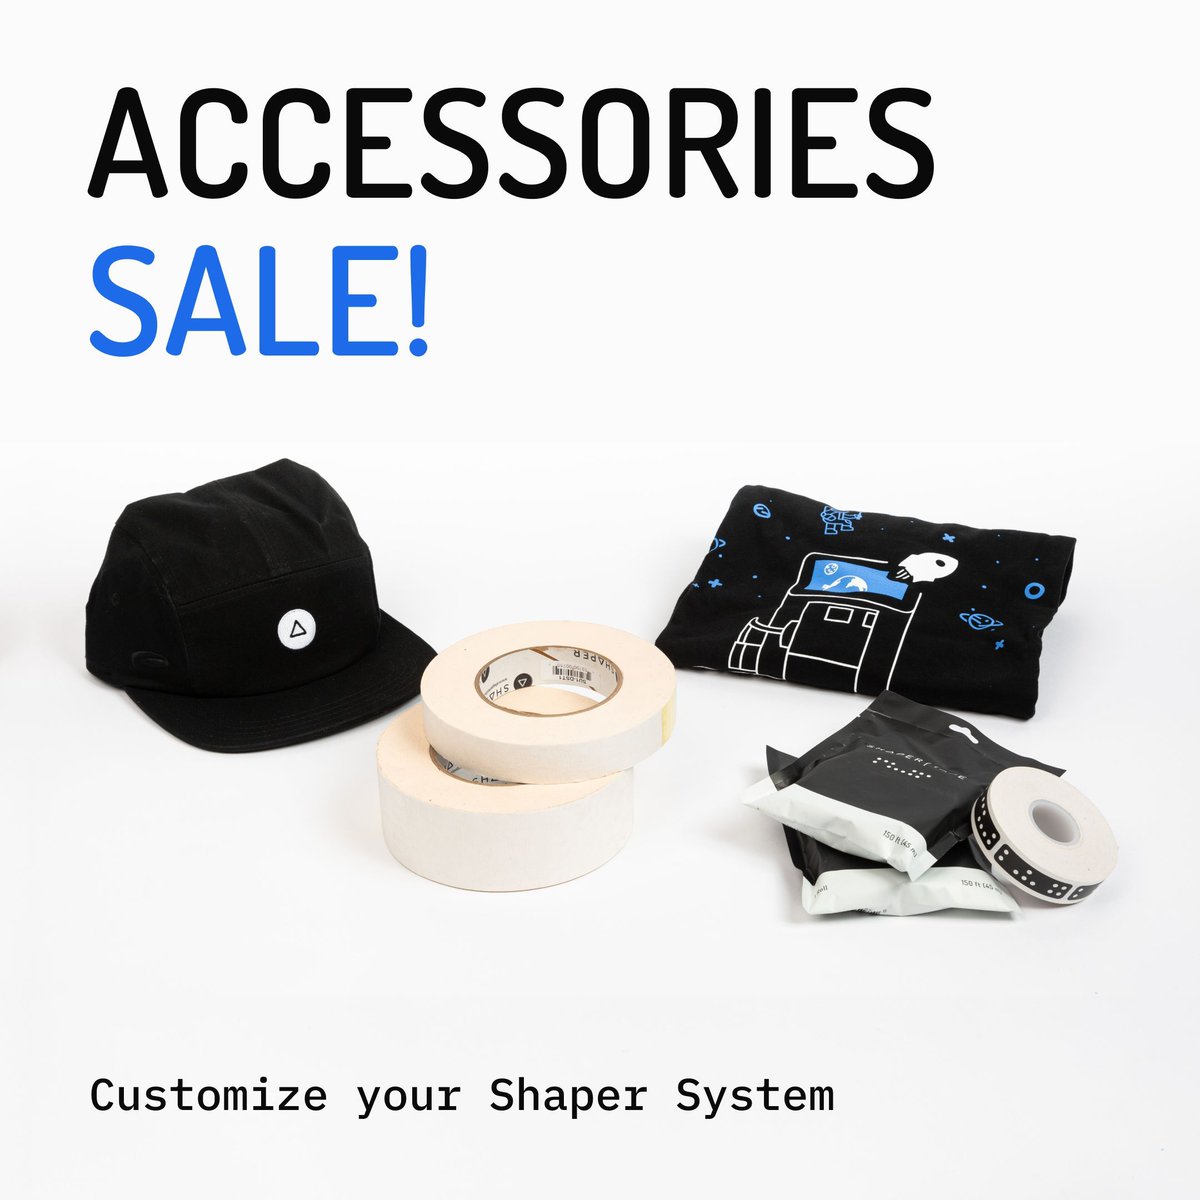 Act FAST! This deal ends 5/21. Save 15% off select Shaper accessories at Mann Tool. Stock up on Shaper router bits, tape, hoses, systainers, collets and callipers.

#shapermade #shapertools #shaperorigin #makercommunity #woodworkerlife  #cncwoodworking #shoplocal #colatoday